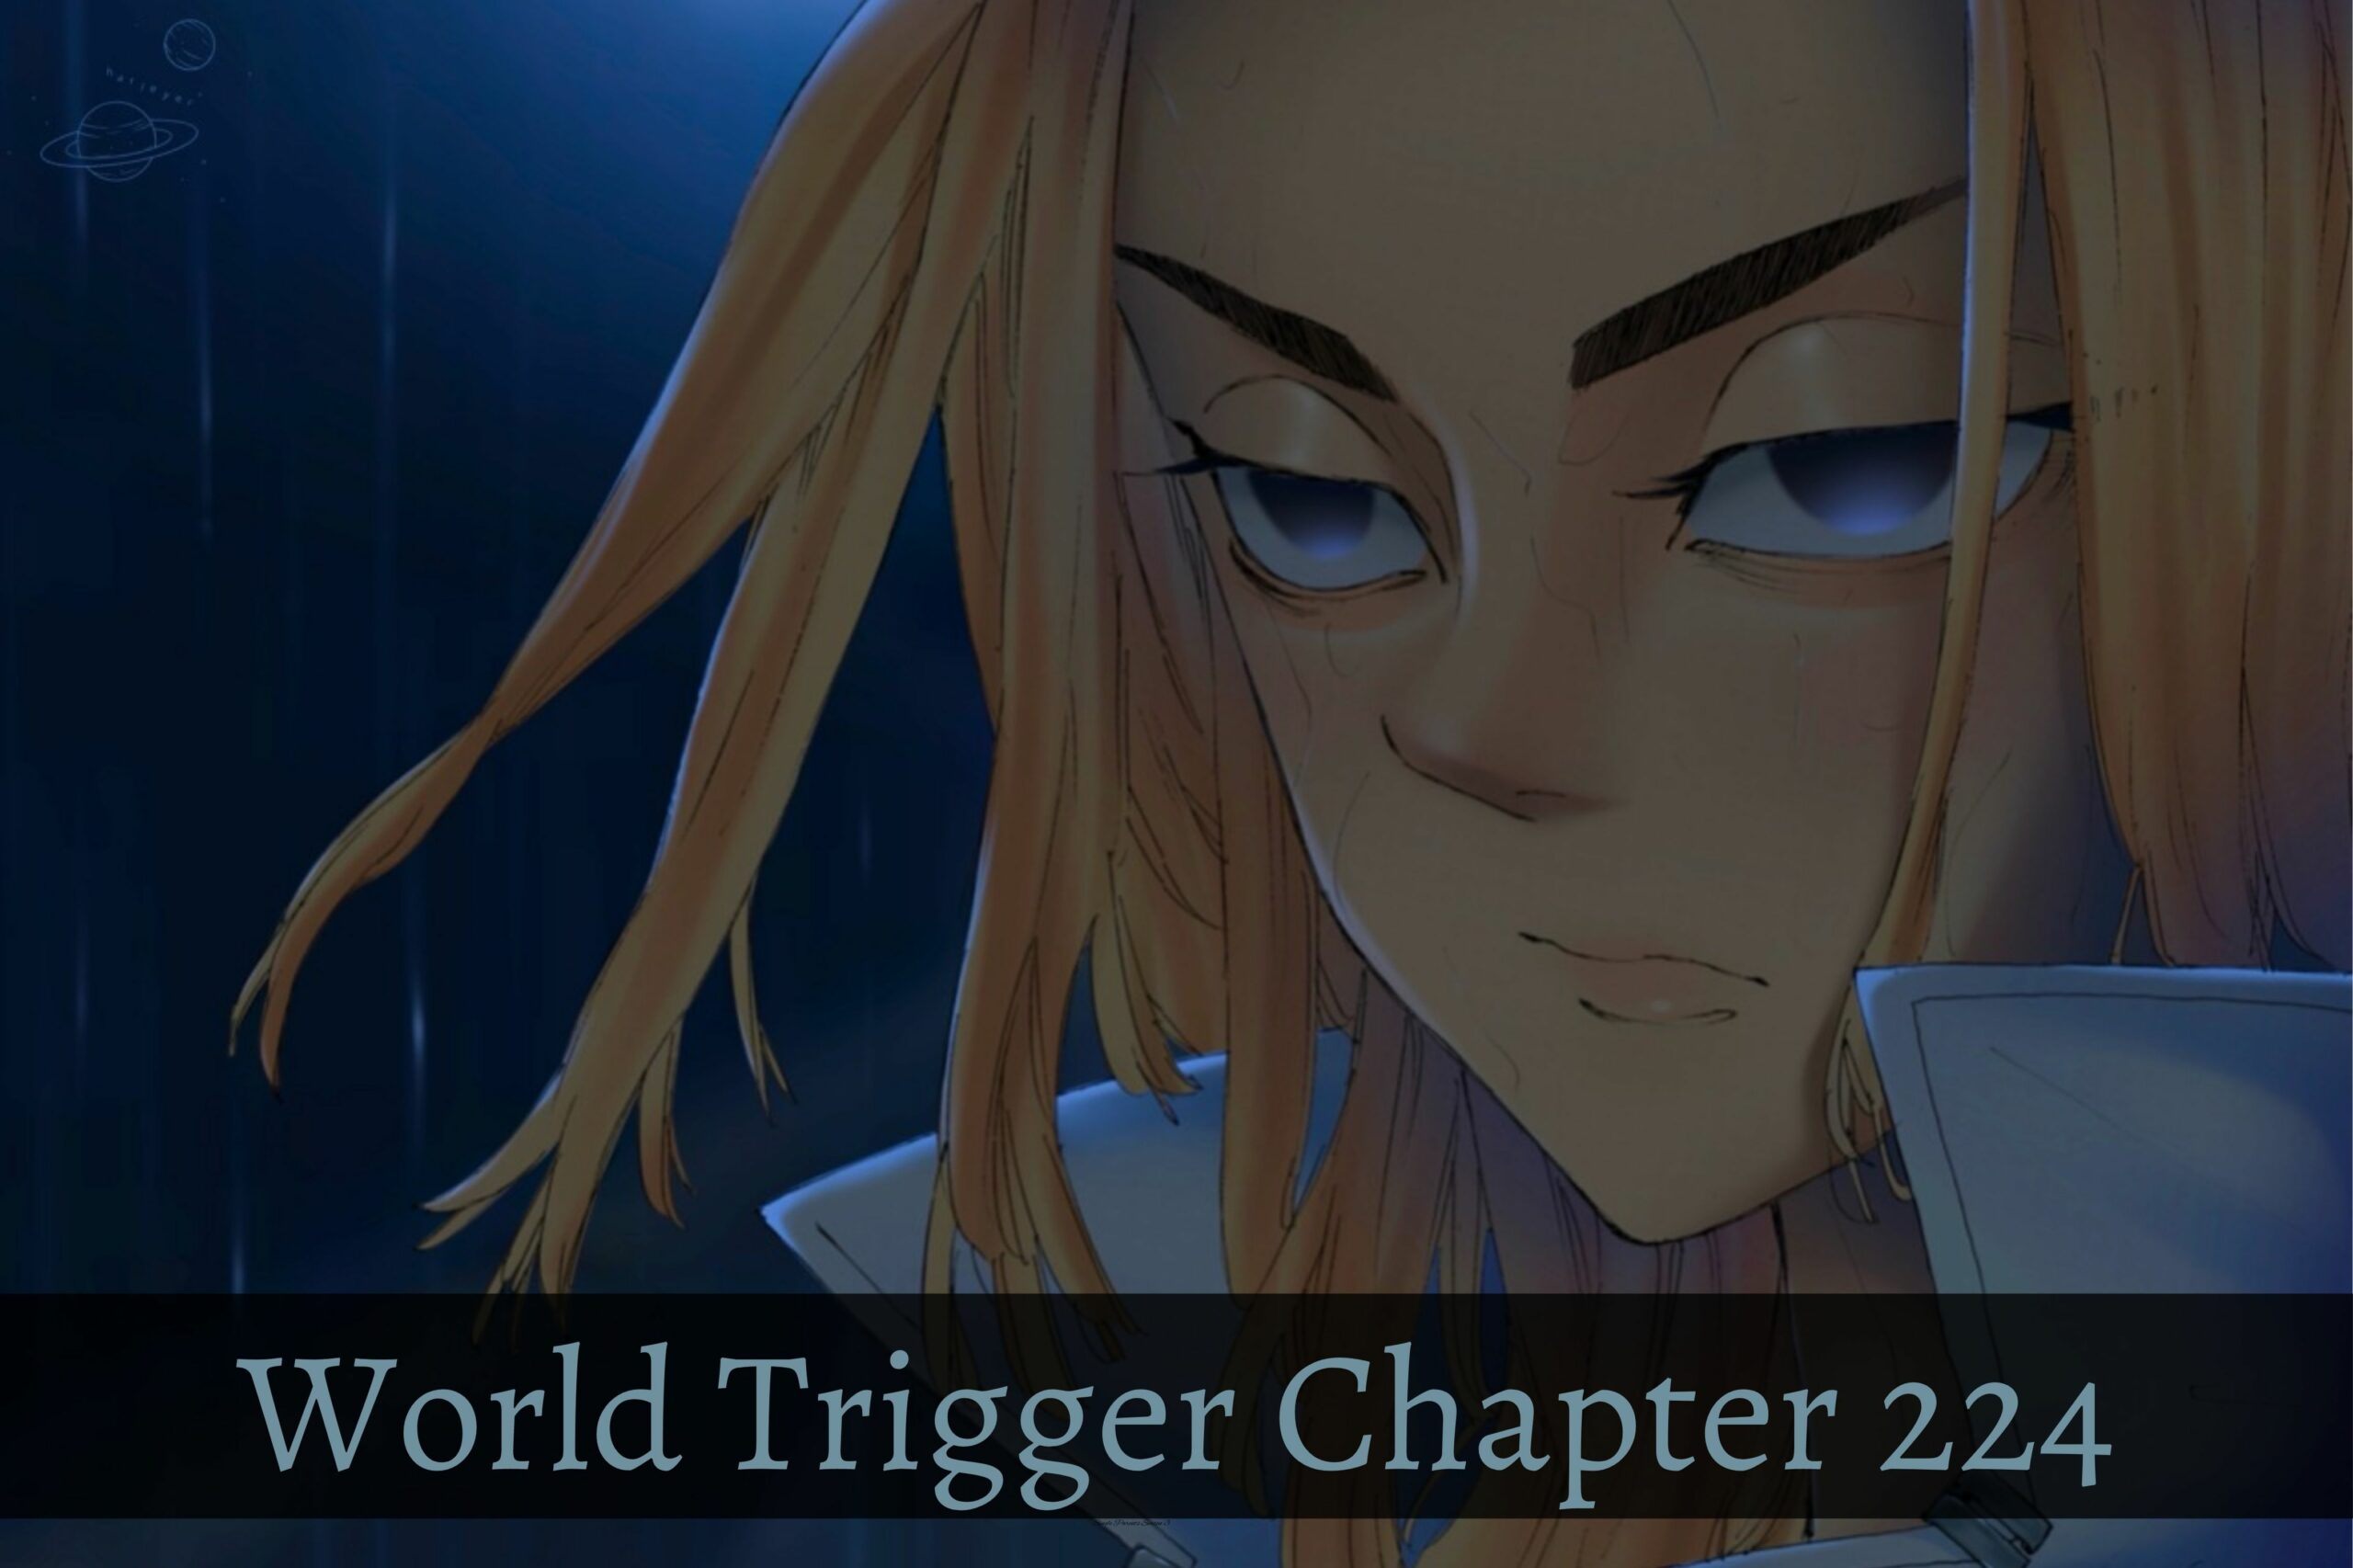 World Trigger Chapter 224 Release Date Status, Cast And Other Updates!